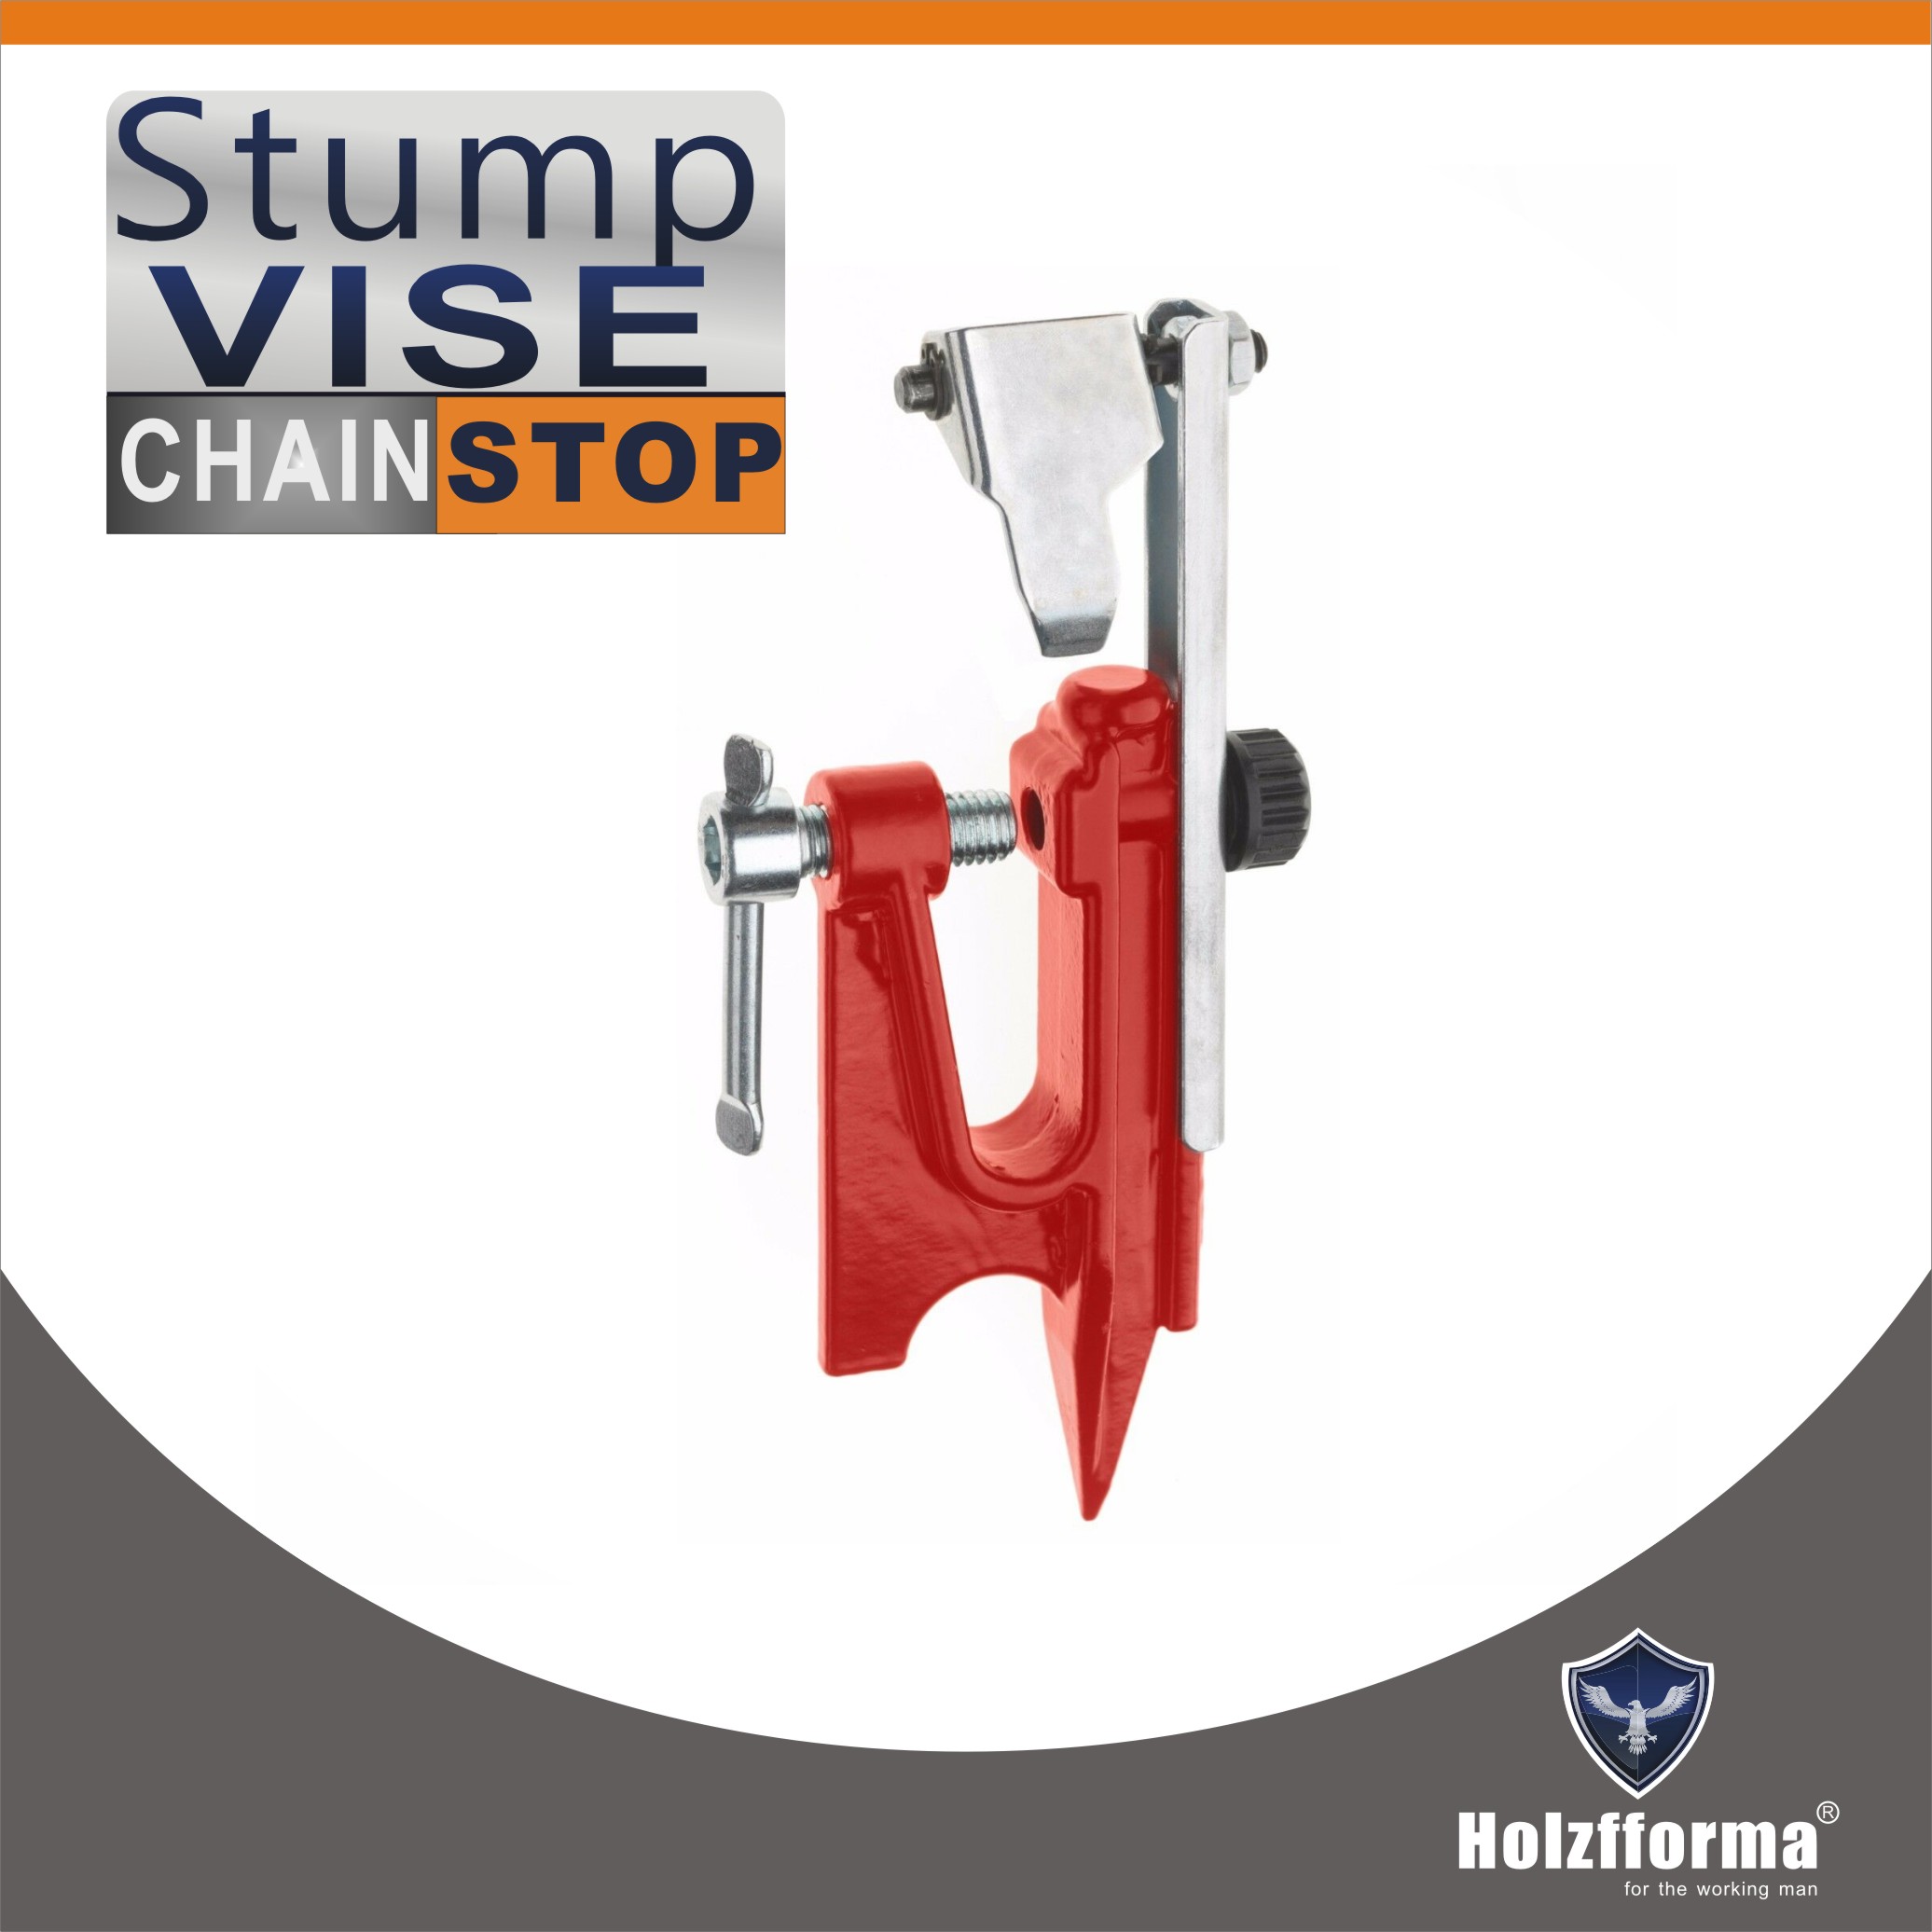 Holzfforma Chain Filing Stump Vise WITH CHAIN STOP For Filing Chainsaw chains Saw Sharpening Filing Tool Bar Clamp